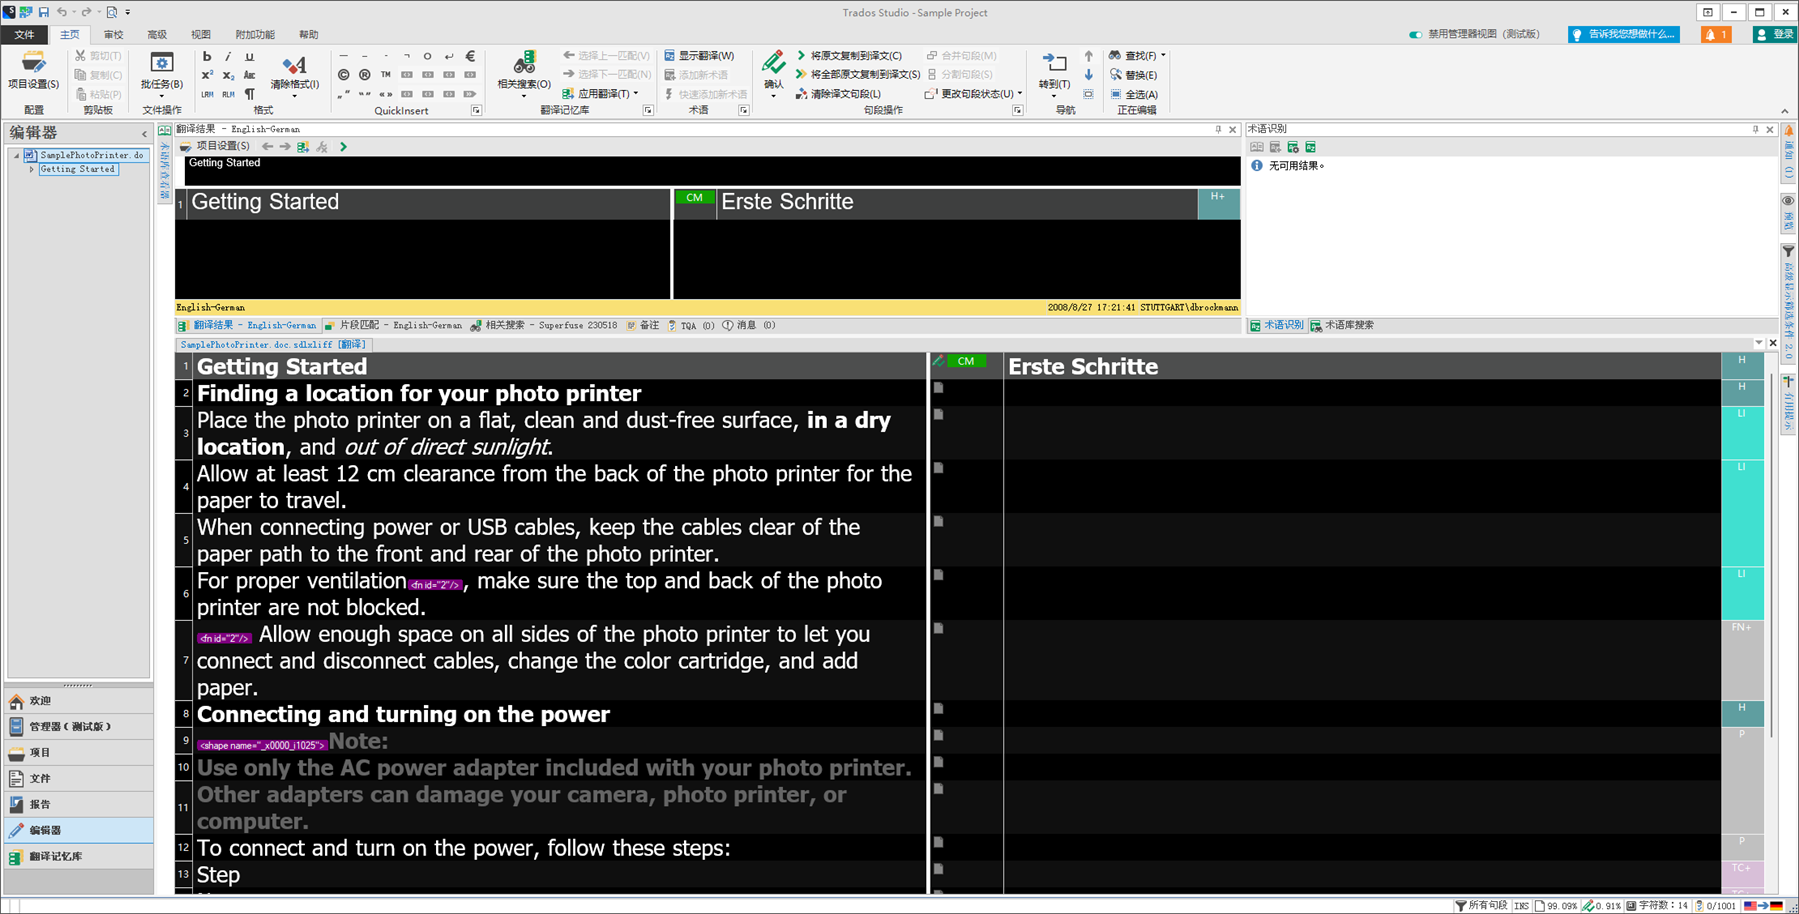 Screenshot of Trados Studio interface with a document open showing English to German translation. The toolbar has light colors and the text editor area has a black background with white and blue text.